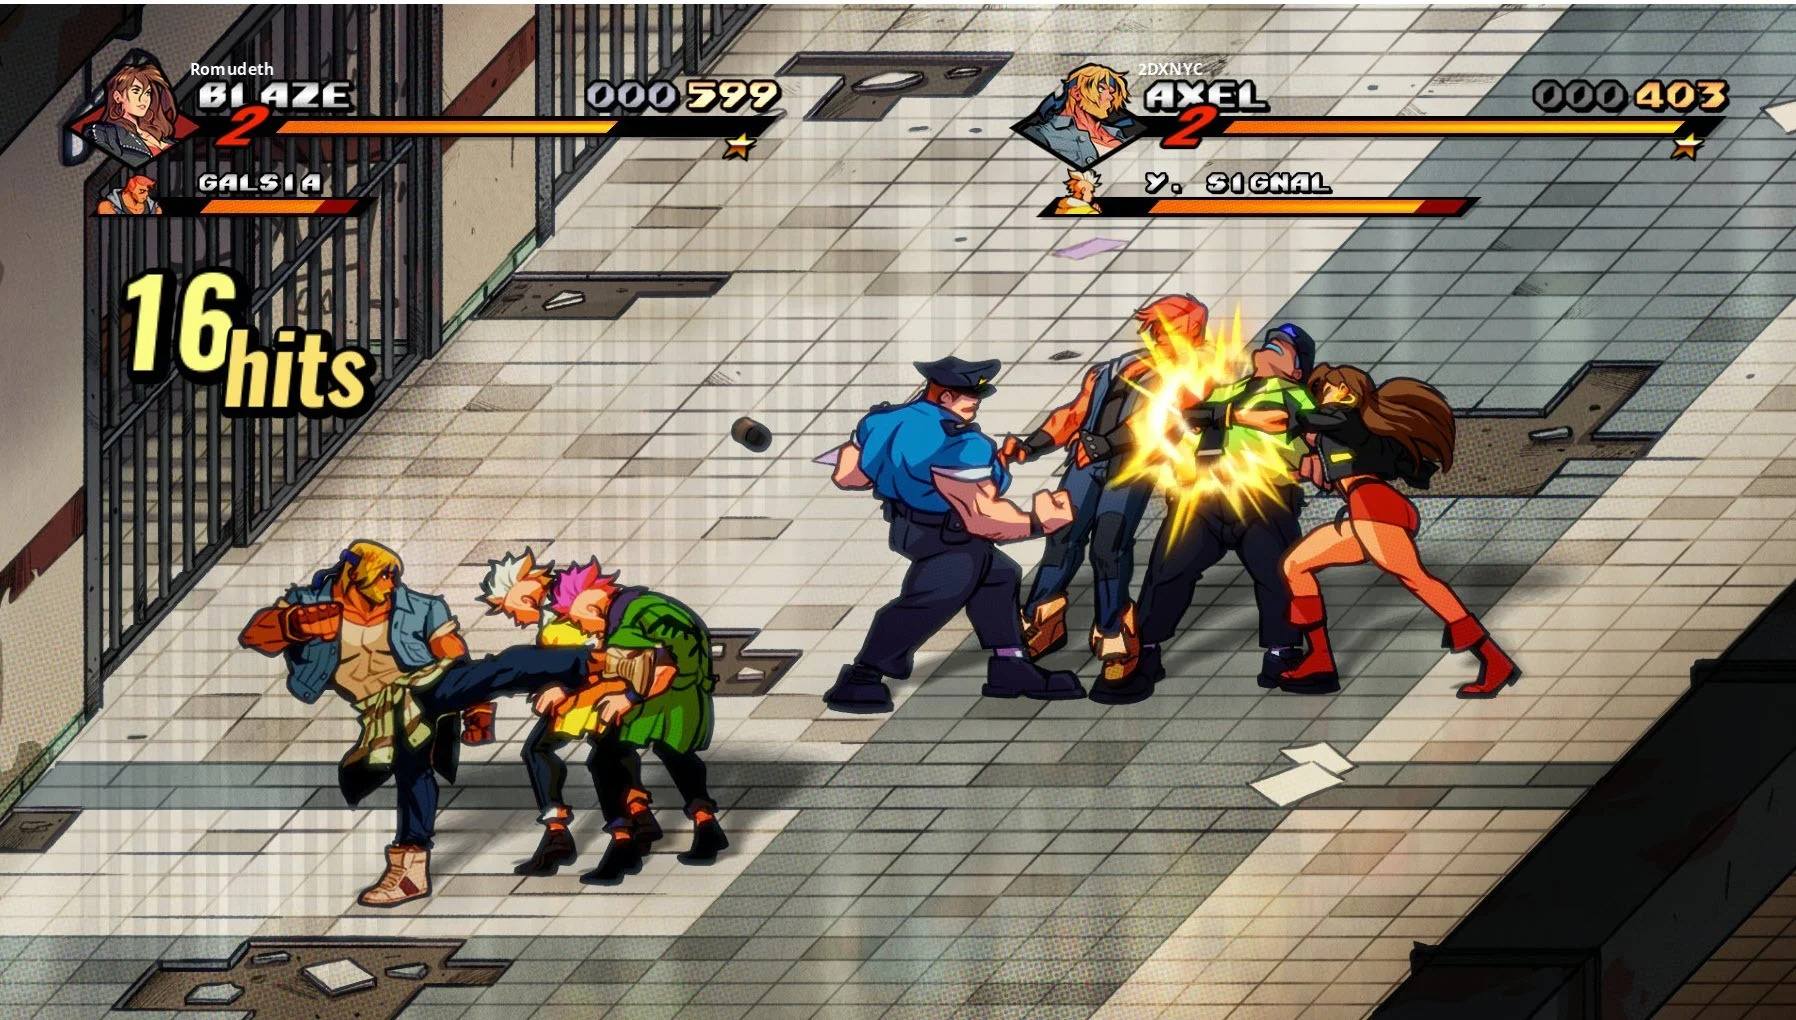 If there's a perfect example of a faithful revival of a classic, it's Streets of Rage 4.